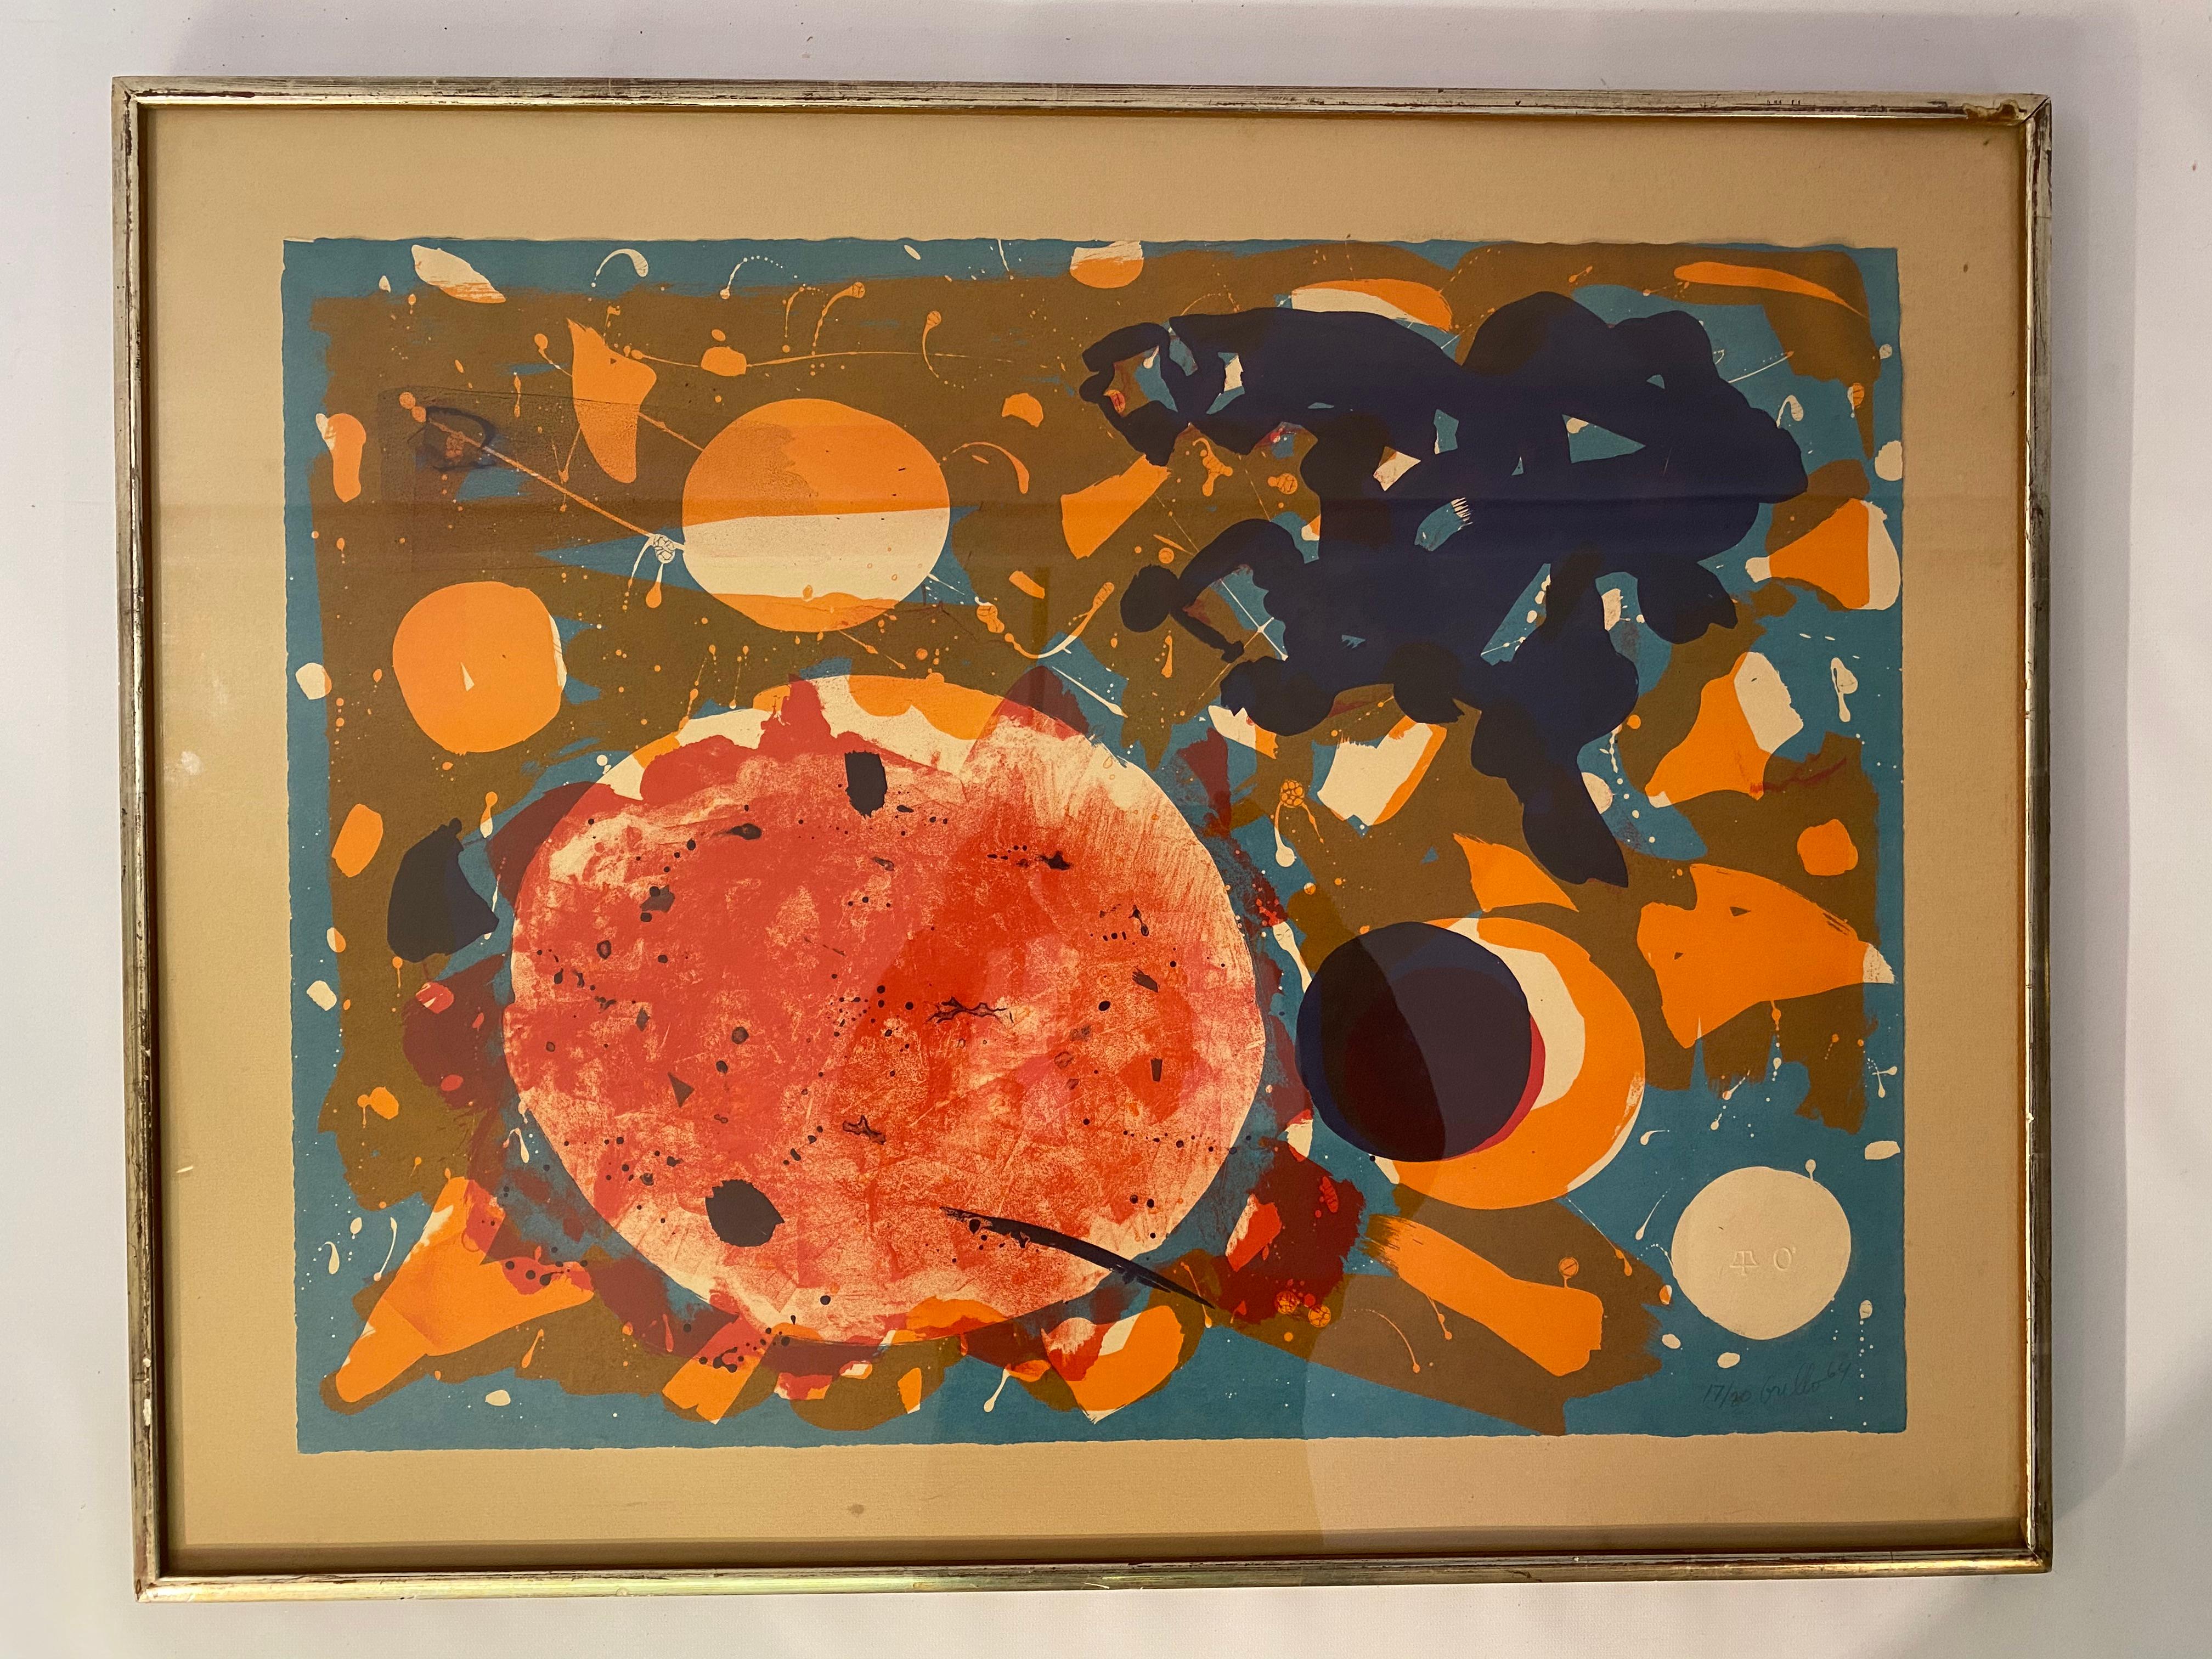 Excellent strong abstract expressionist lithograph by John Grillo. Pencil signed, dated and numbered, 17/30, John Grillo, '64. The image size is approximately 25.75